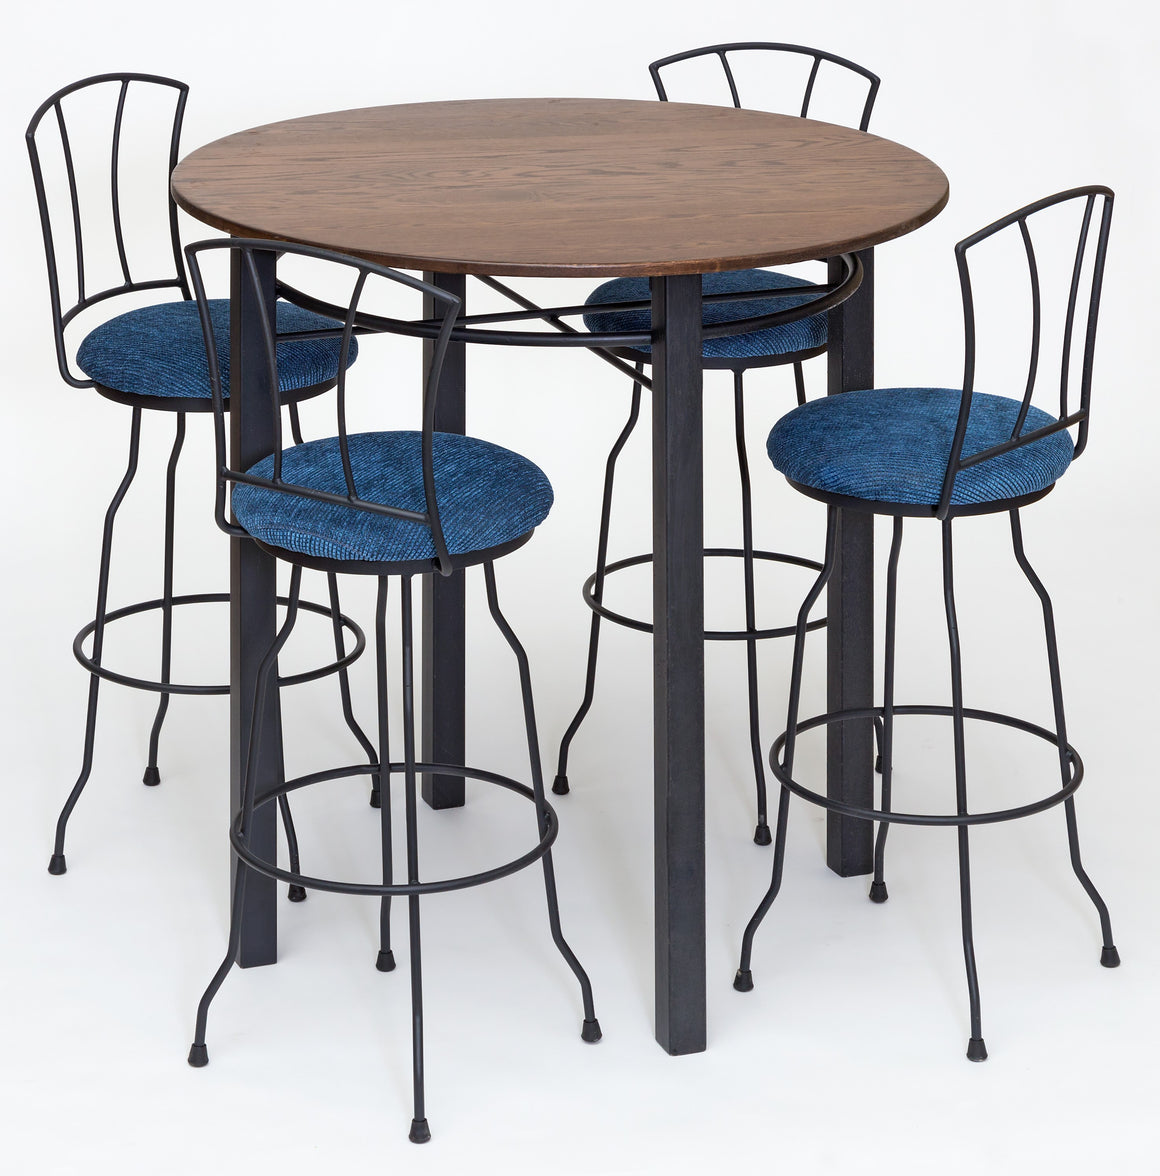 Bar Table & Chairs (Wrought Iron #MH725 & #MH726)